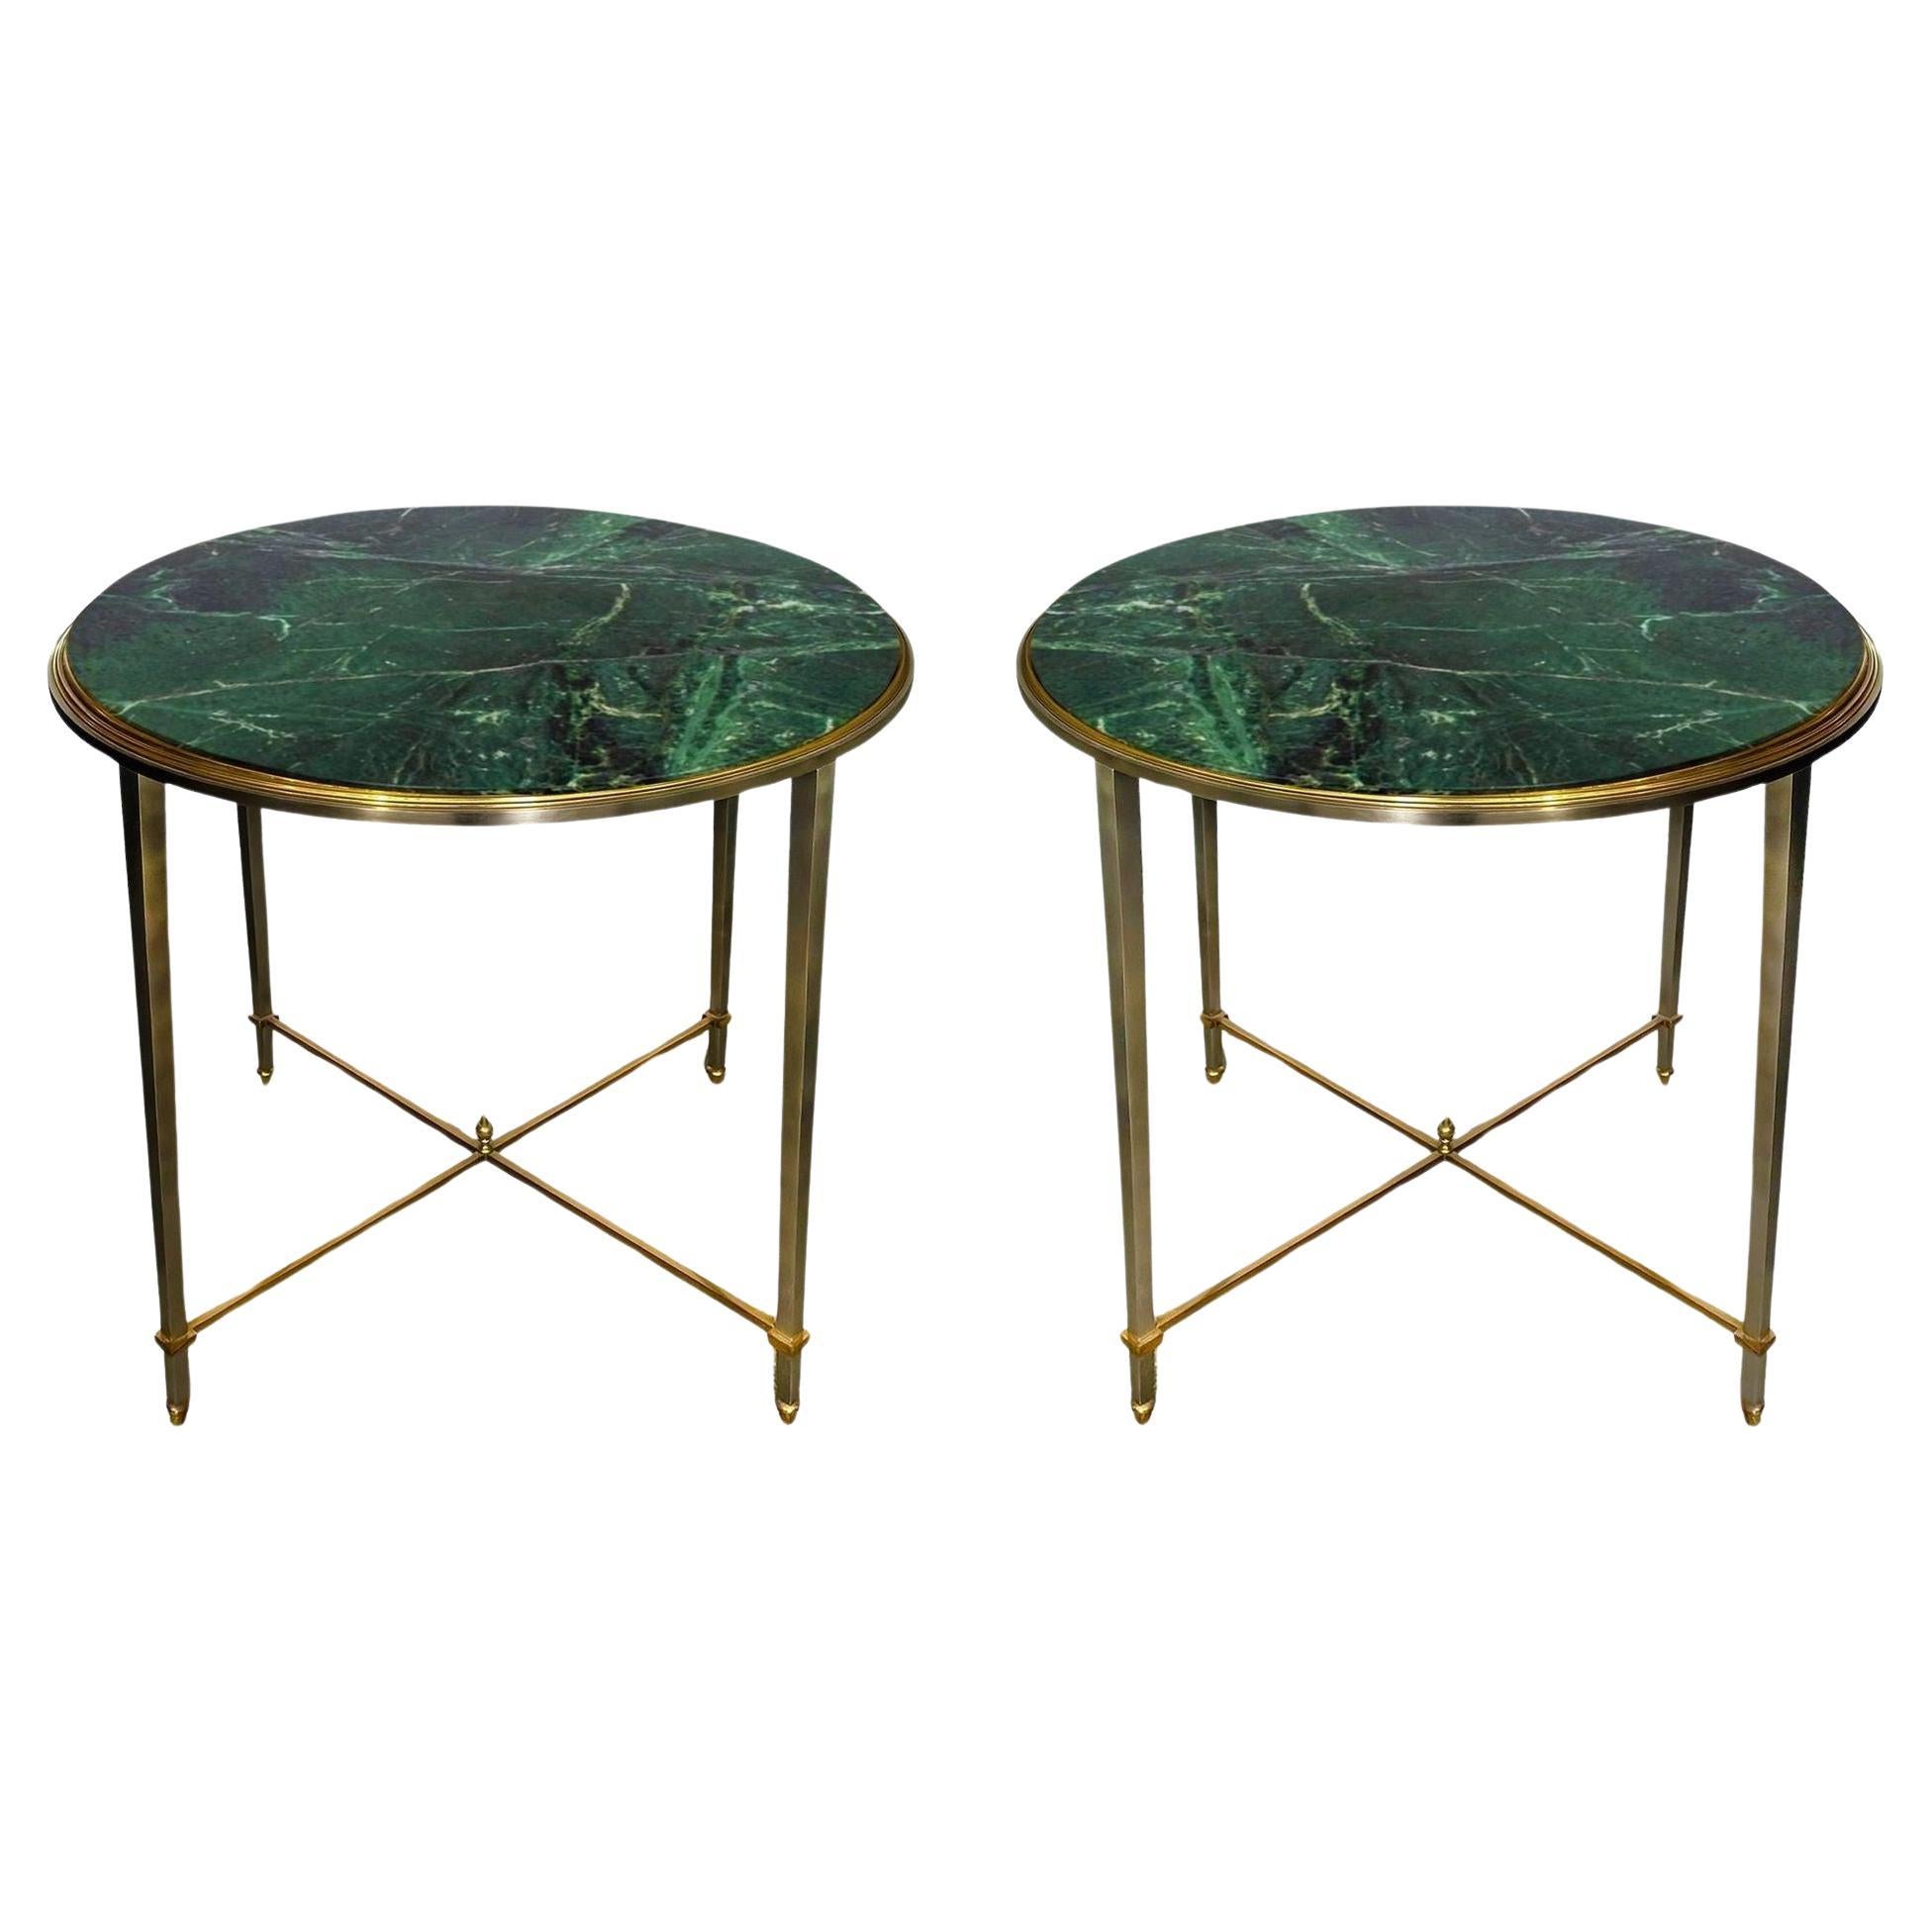 Pair of Maison Jansen Side Tables with Verde Antico Marble Tops For Sale